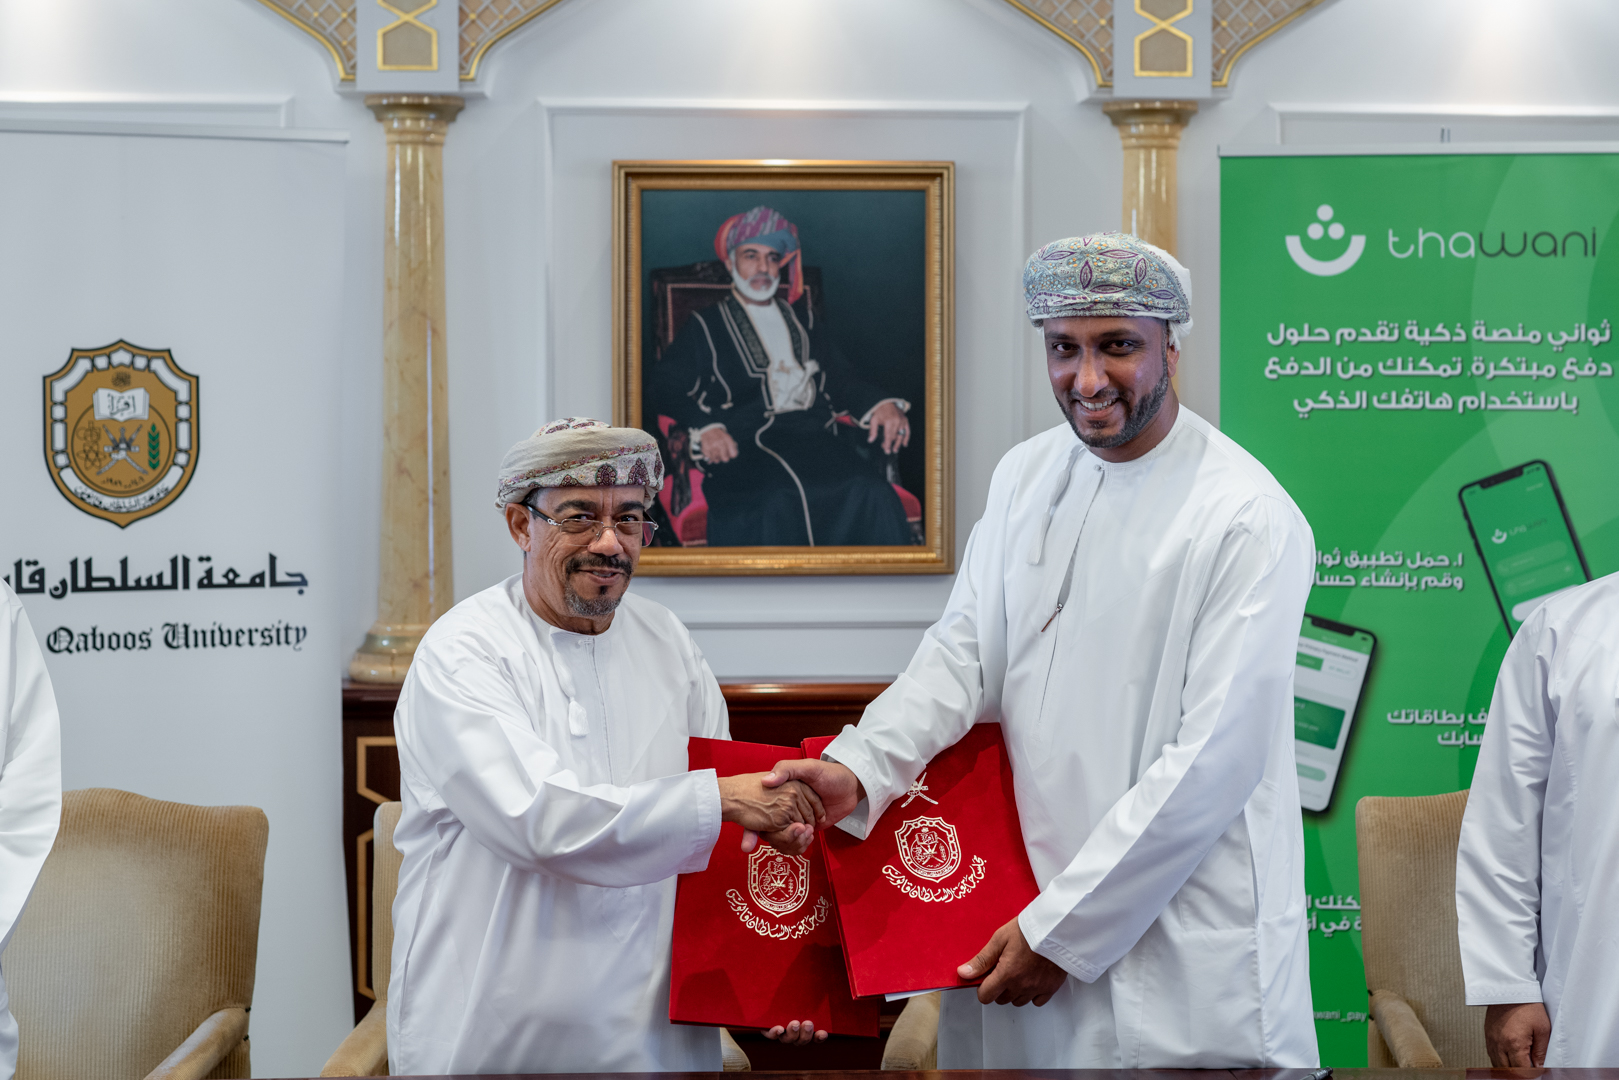 Thawani Technologies Company signs cooperation agreement to provide smart electronic payment services at SQU